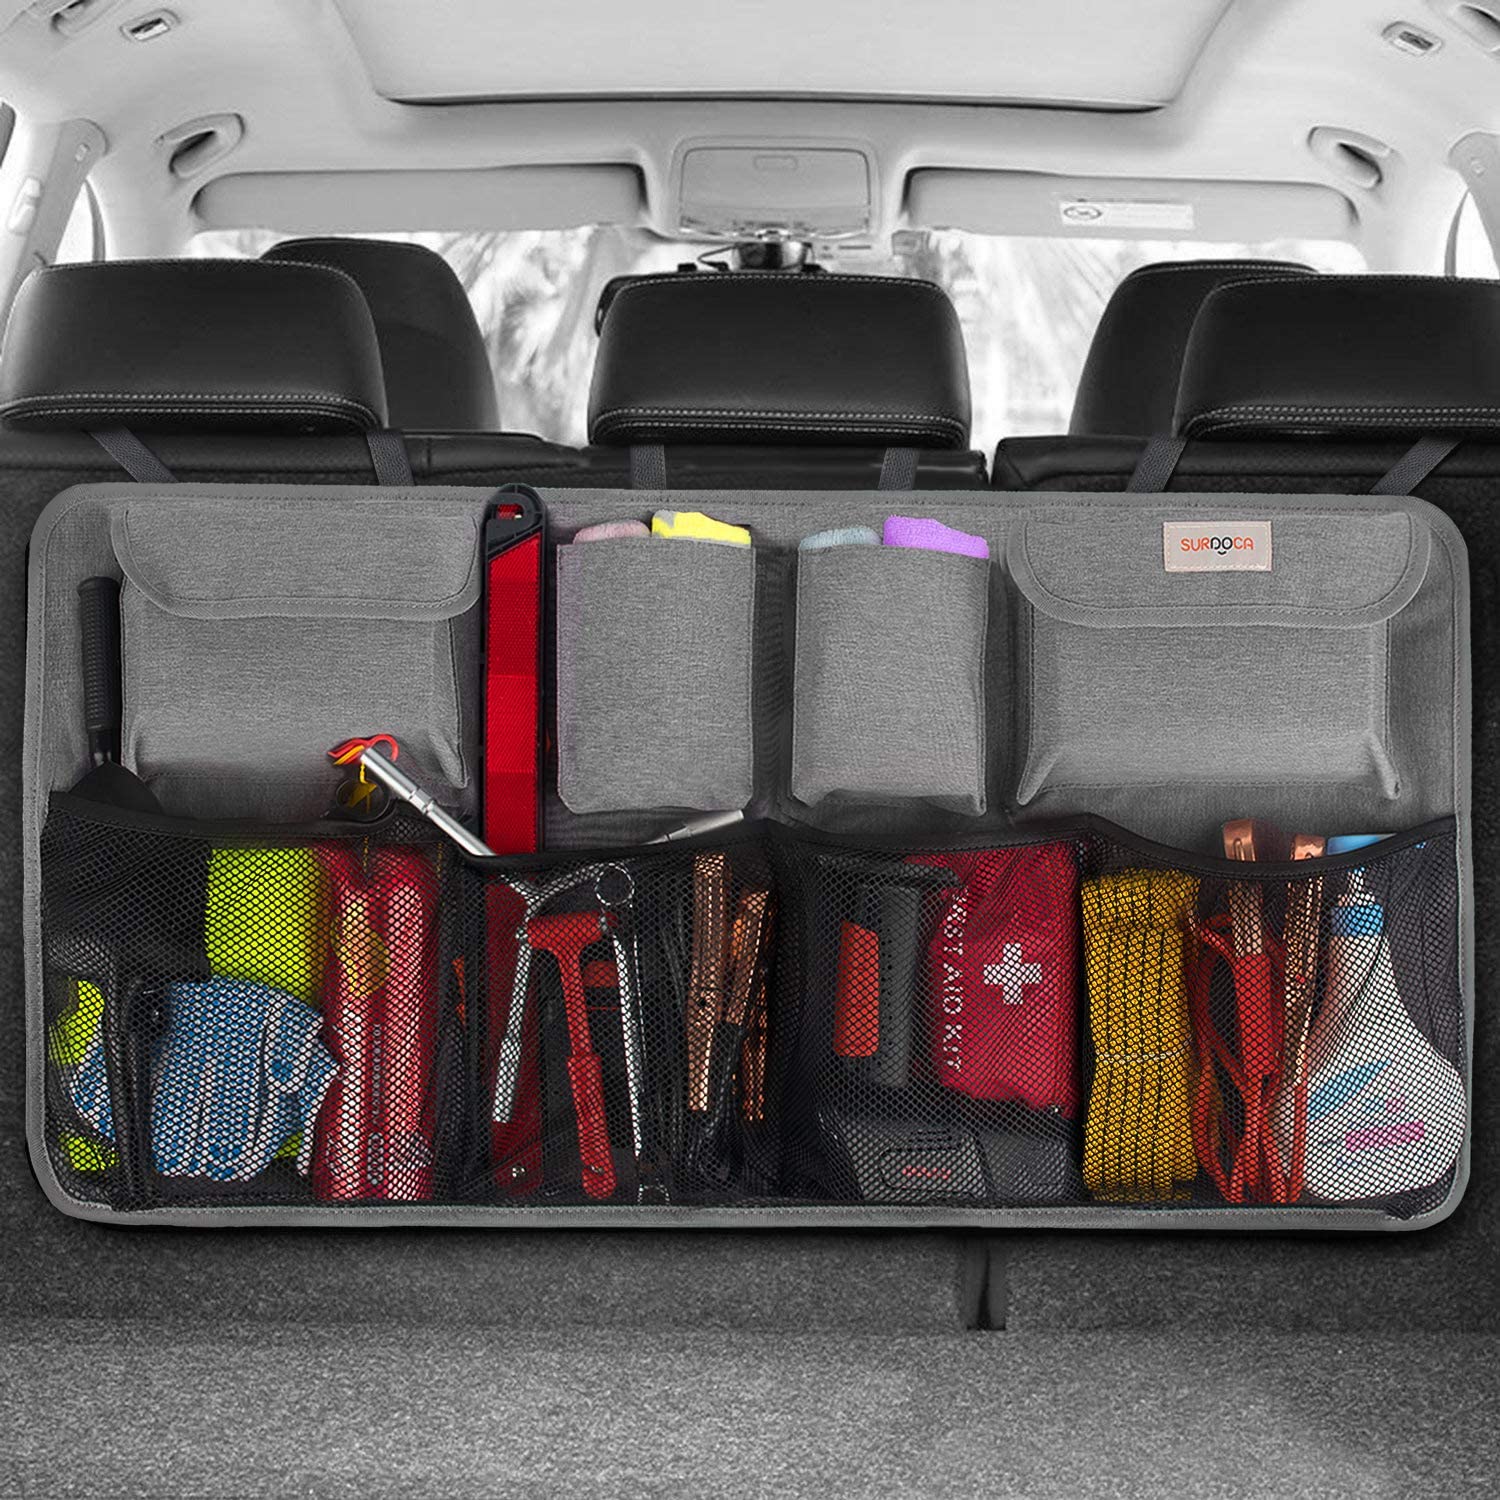 The Best Car Organization Products in 2023